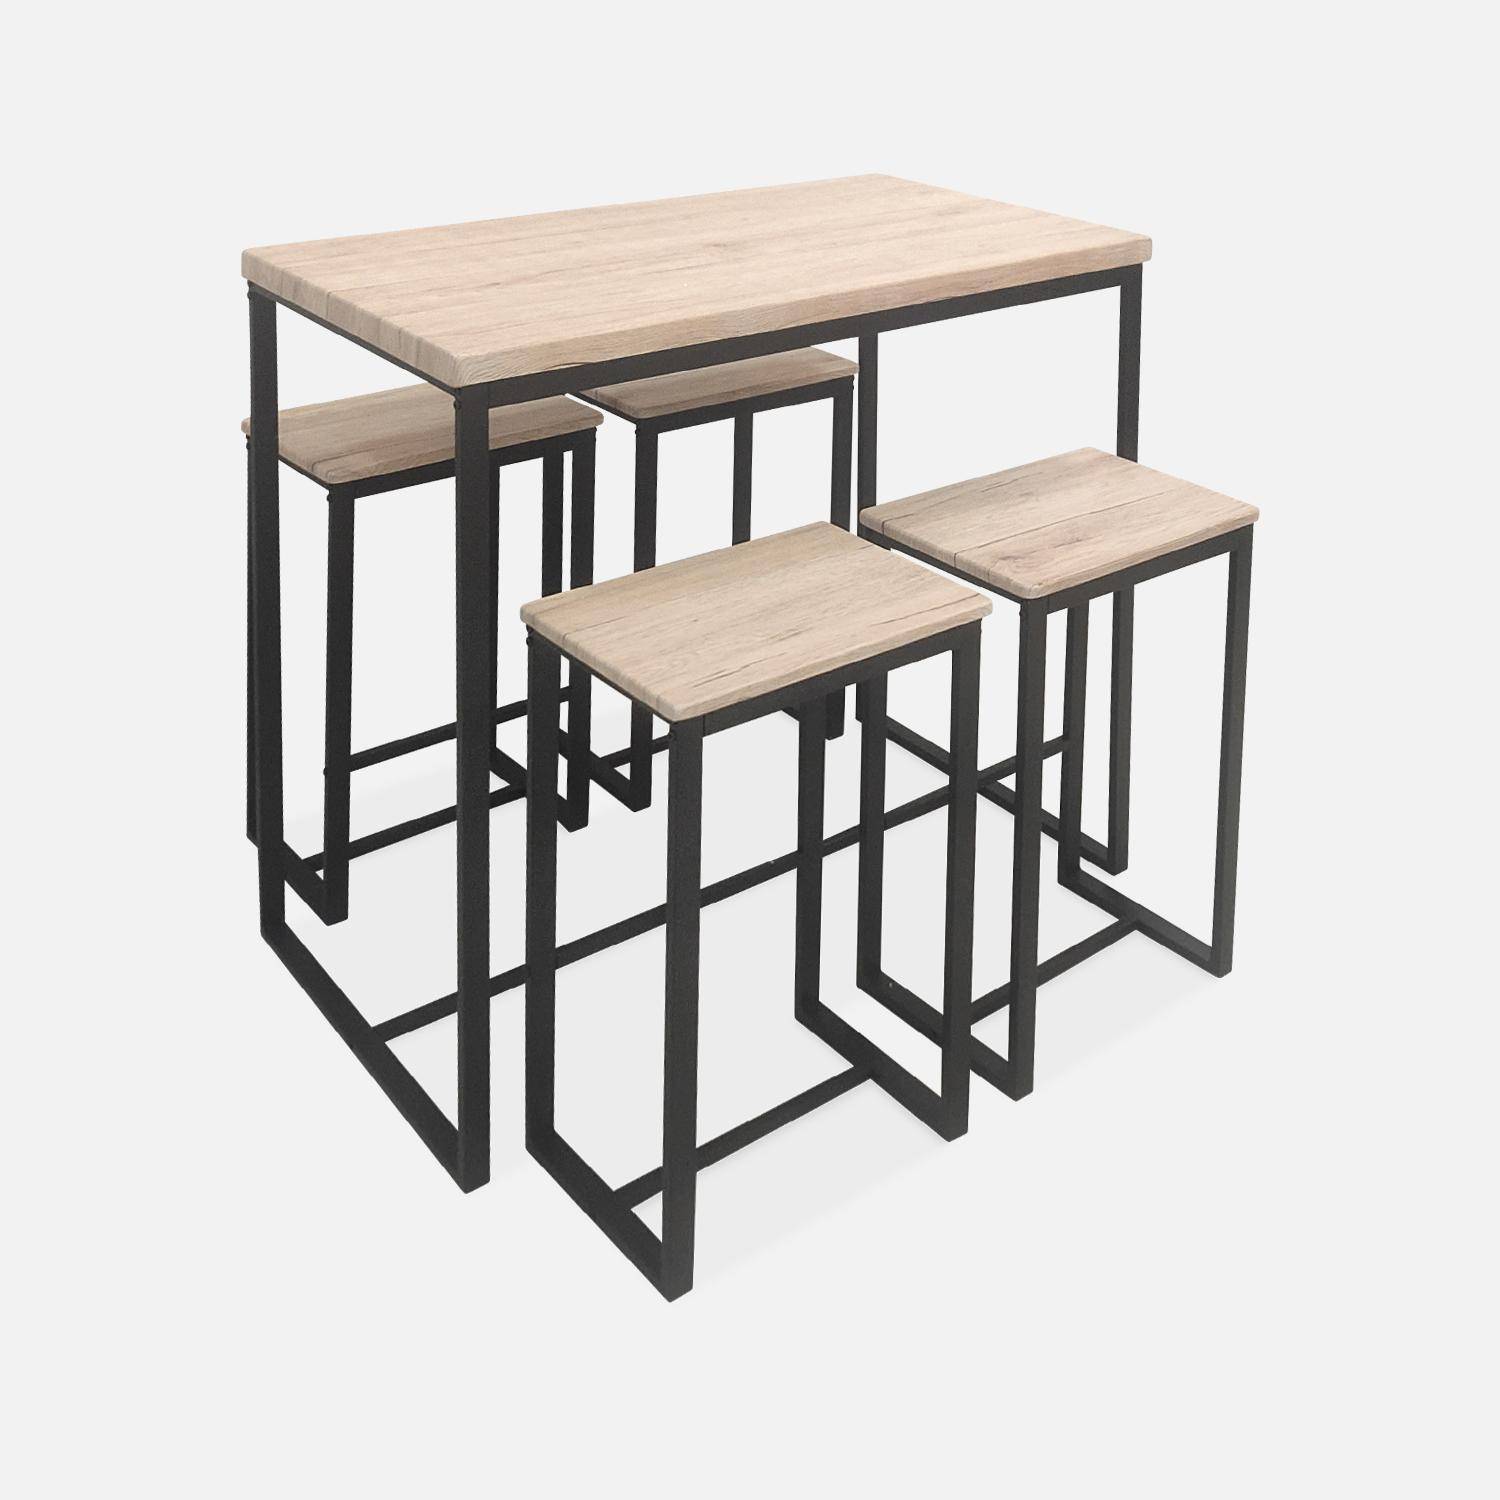 Industrial bar style table set with 4 stools, dining set 100x60x90cm - Loft - Black Photo3